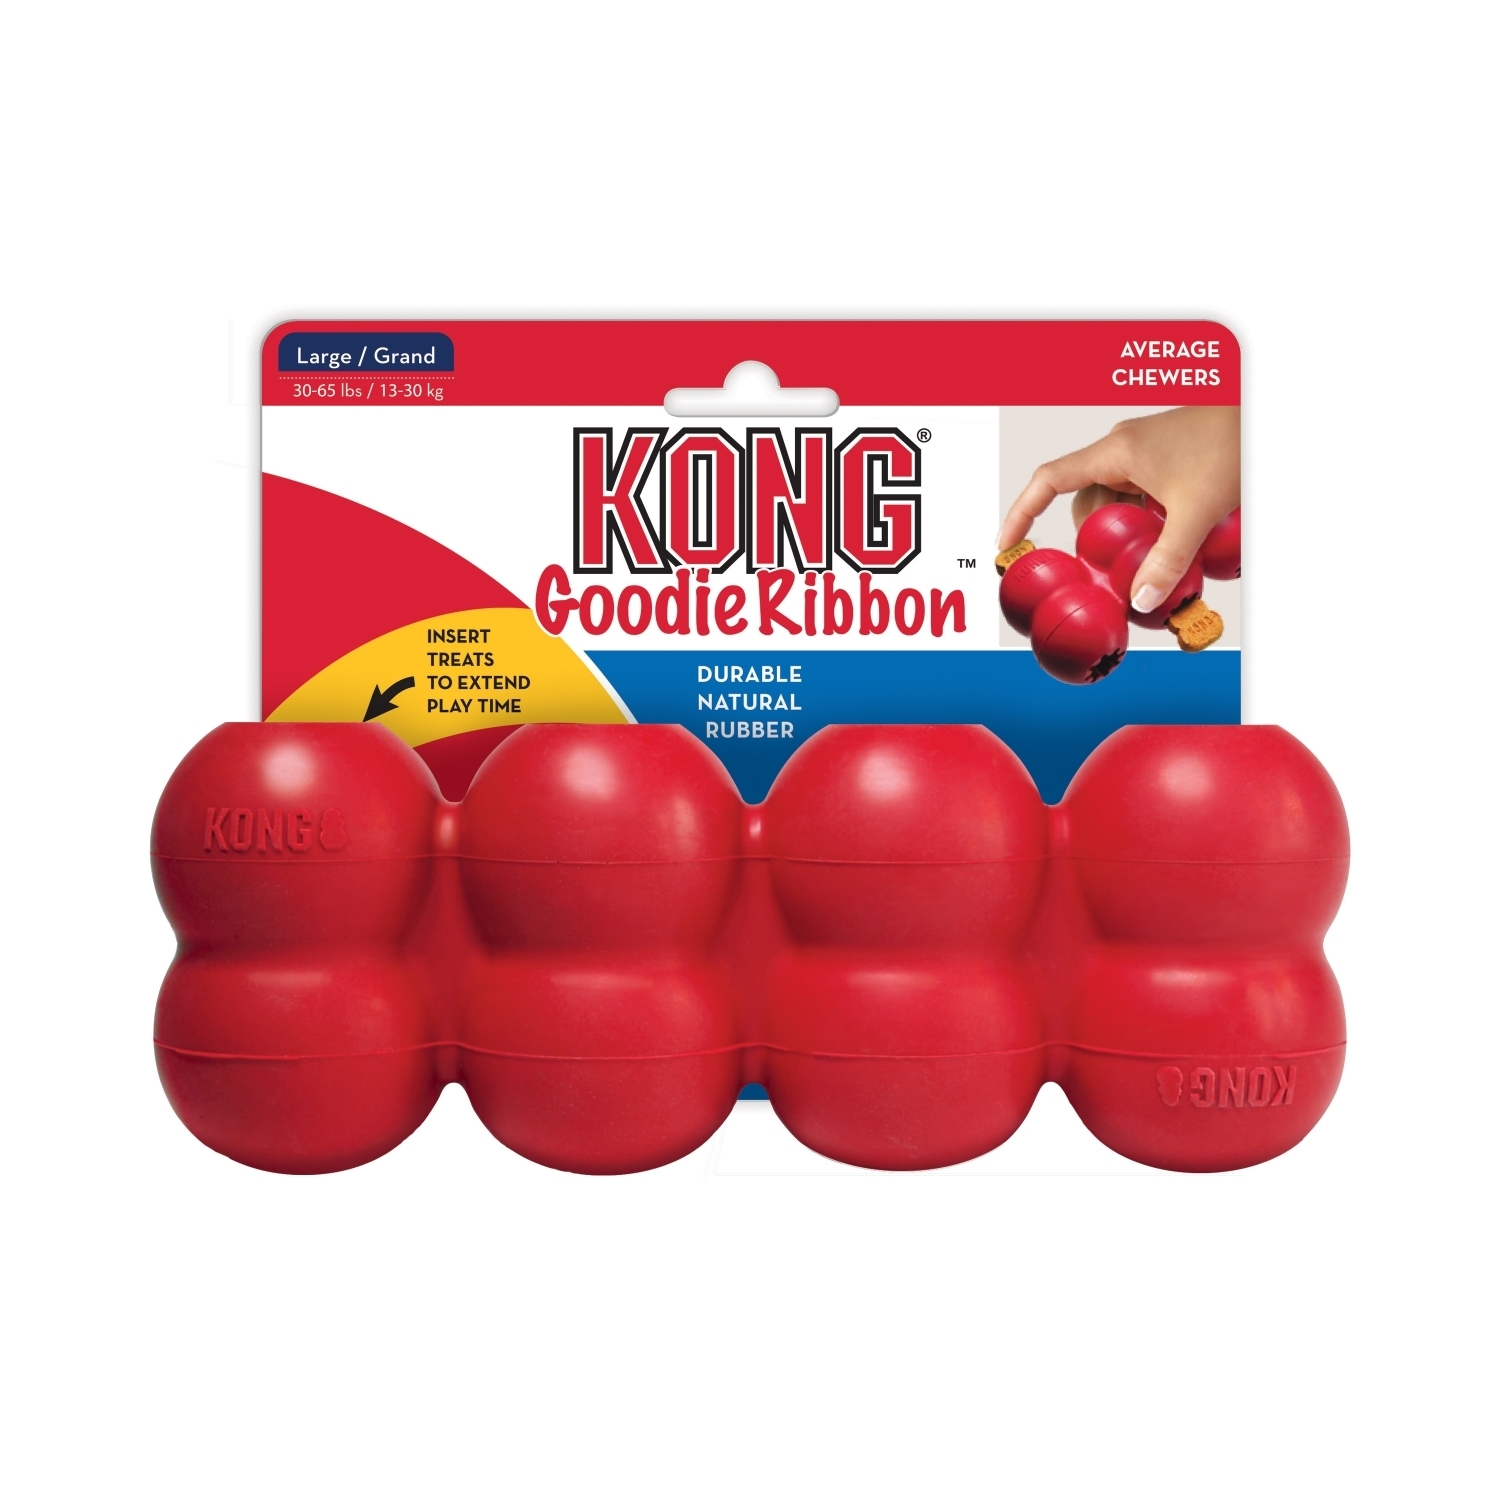 KONG Good Ribbon Treat Hiding and Dispensing Natural Rubber Dog Toy - Large - 3 Unit/s image 1